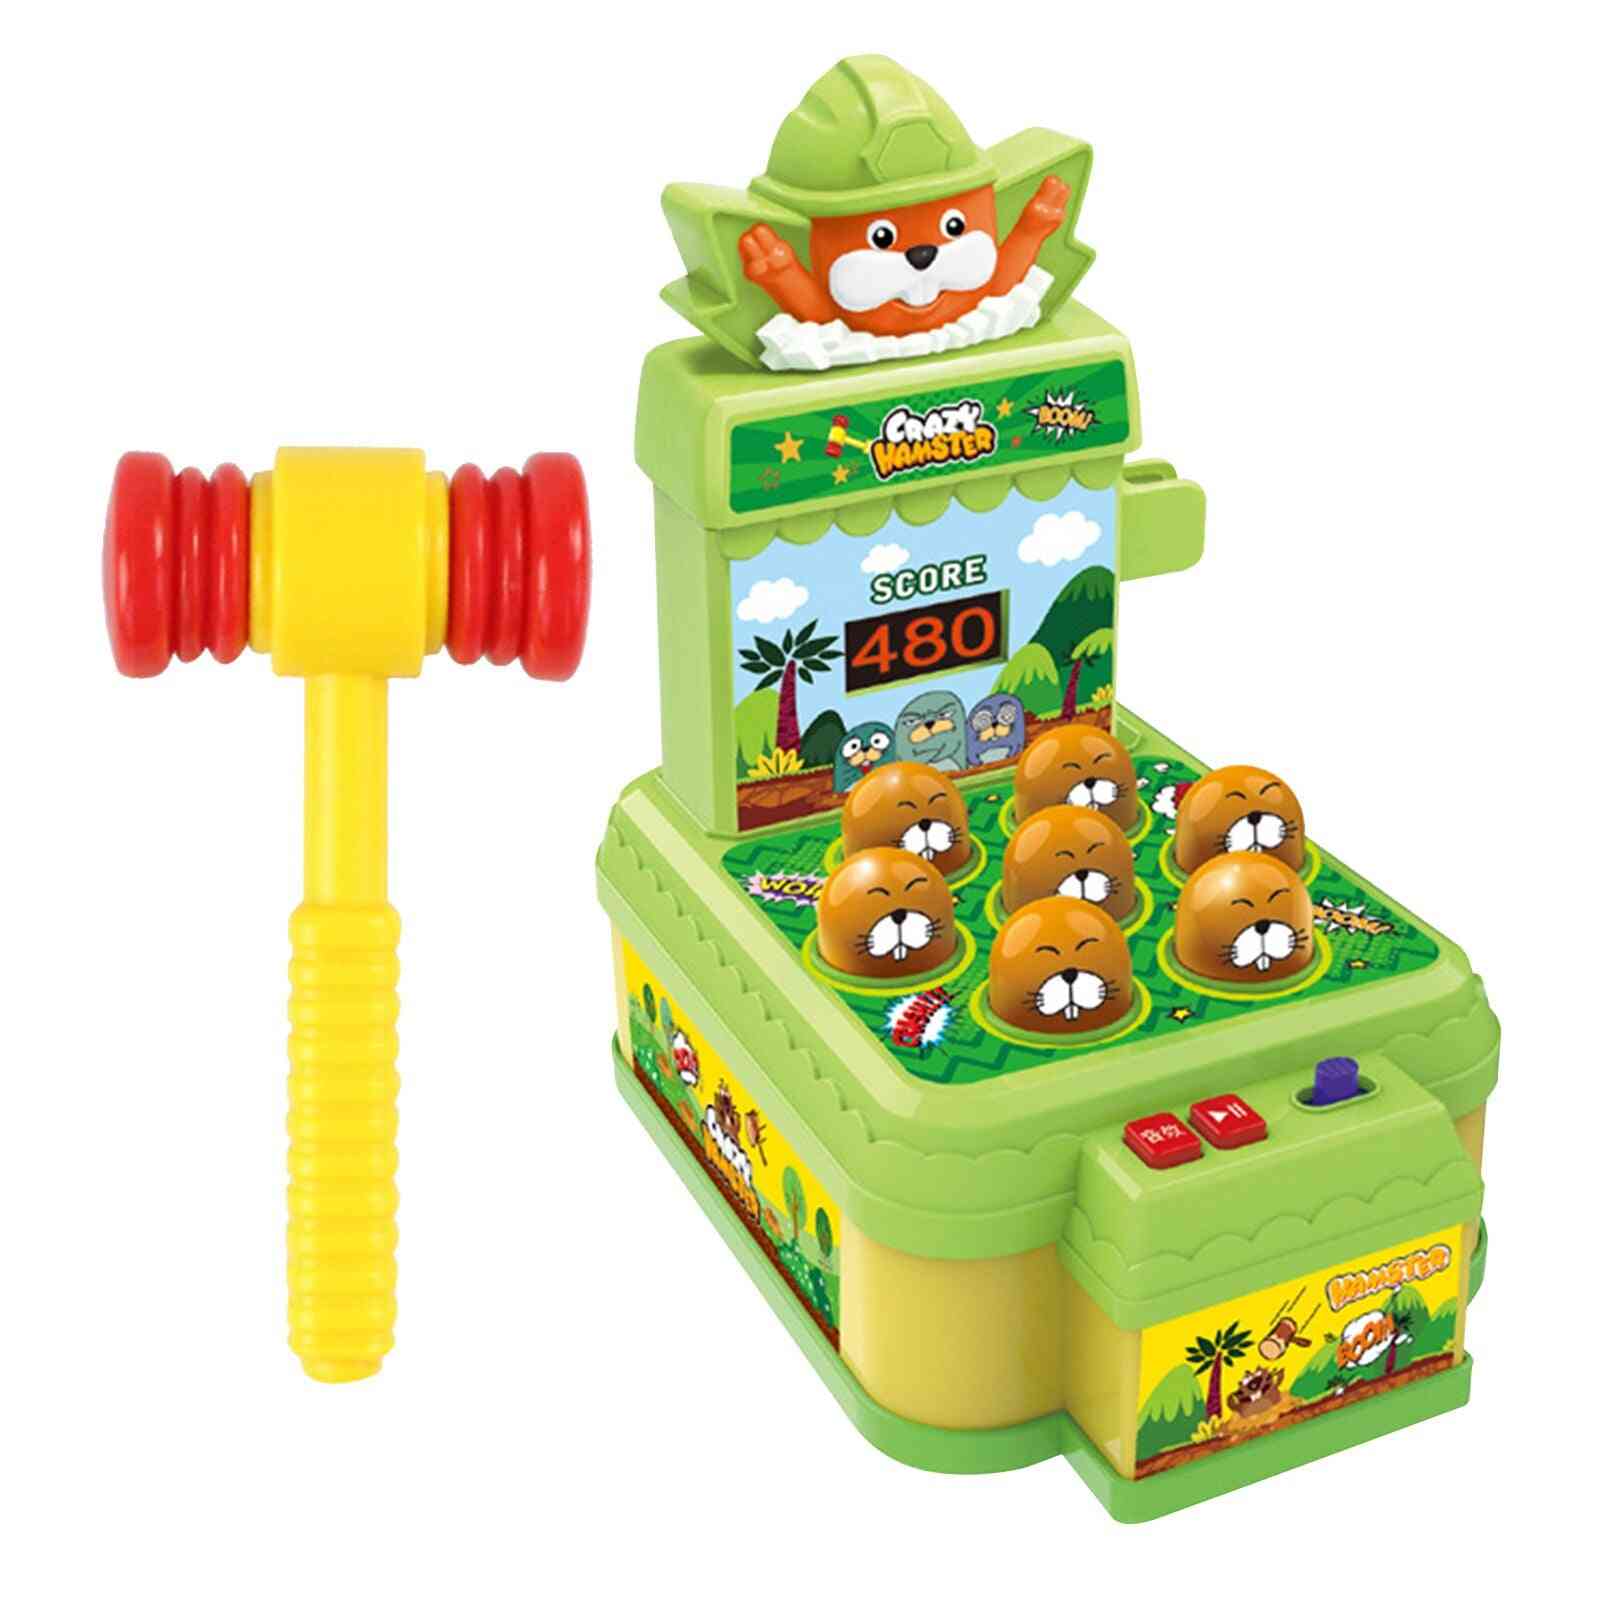 A Mole Game Interactive Pounding With Lights Sounds Pick Up Small Hammer Hitting Toy Educational Hand Exercise